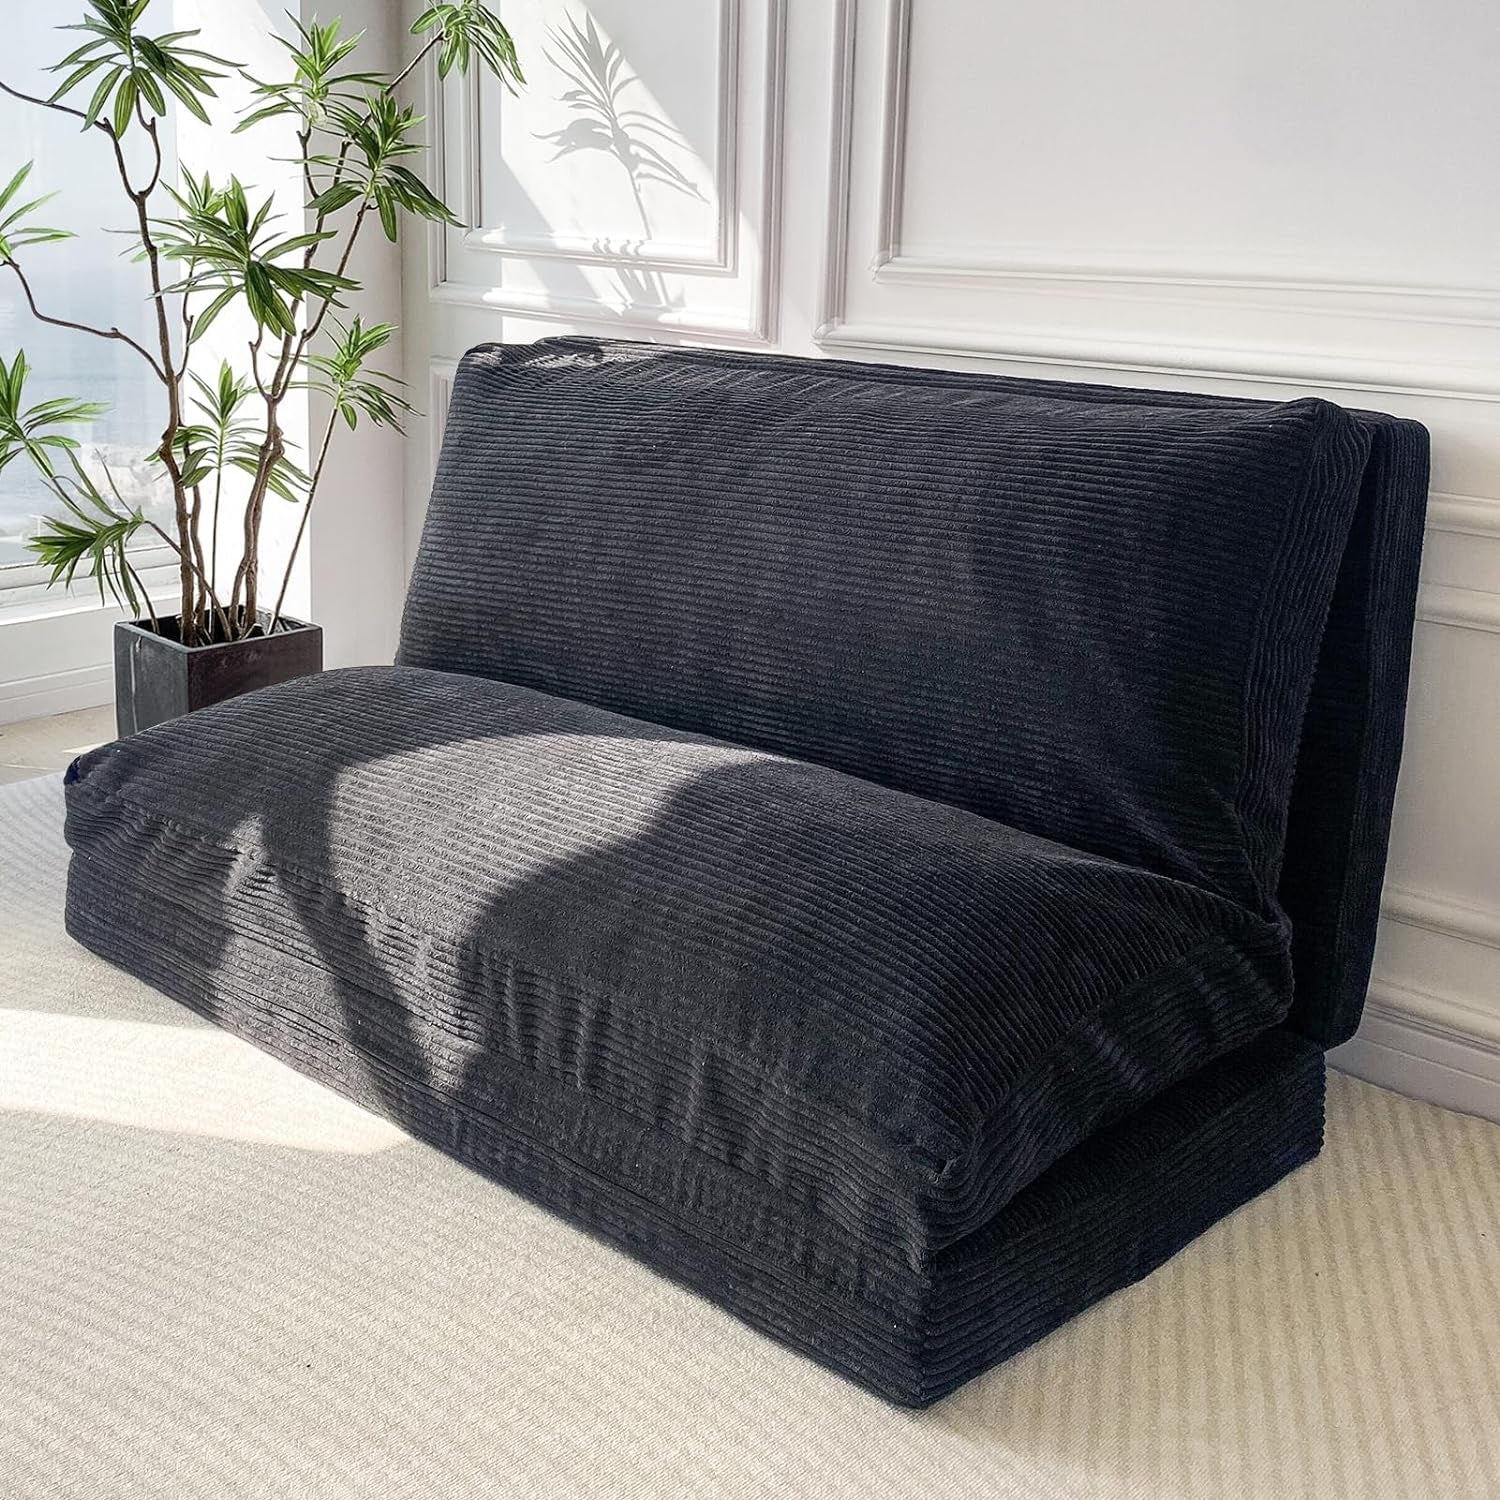 Bean Bag Bed Folding Sofa Bed Floor Mattress for Adults, Extra Thick and Long Floor Sofa with Corded Washable Cover, Black, 30X95 Inch